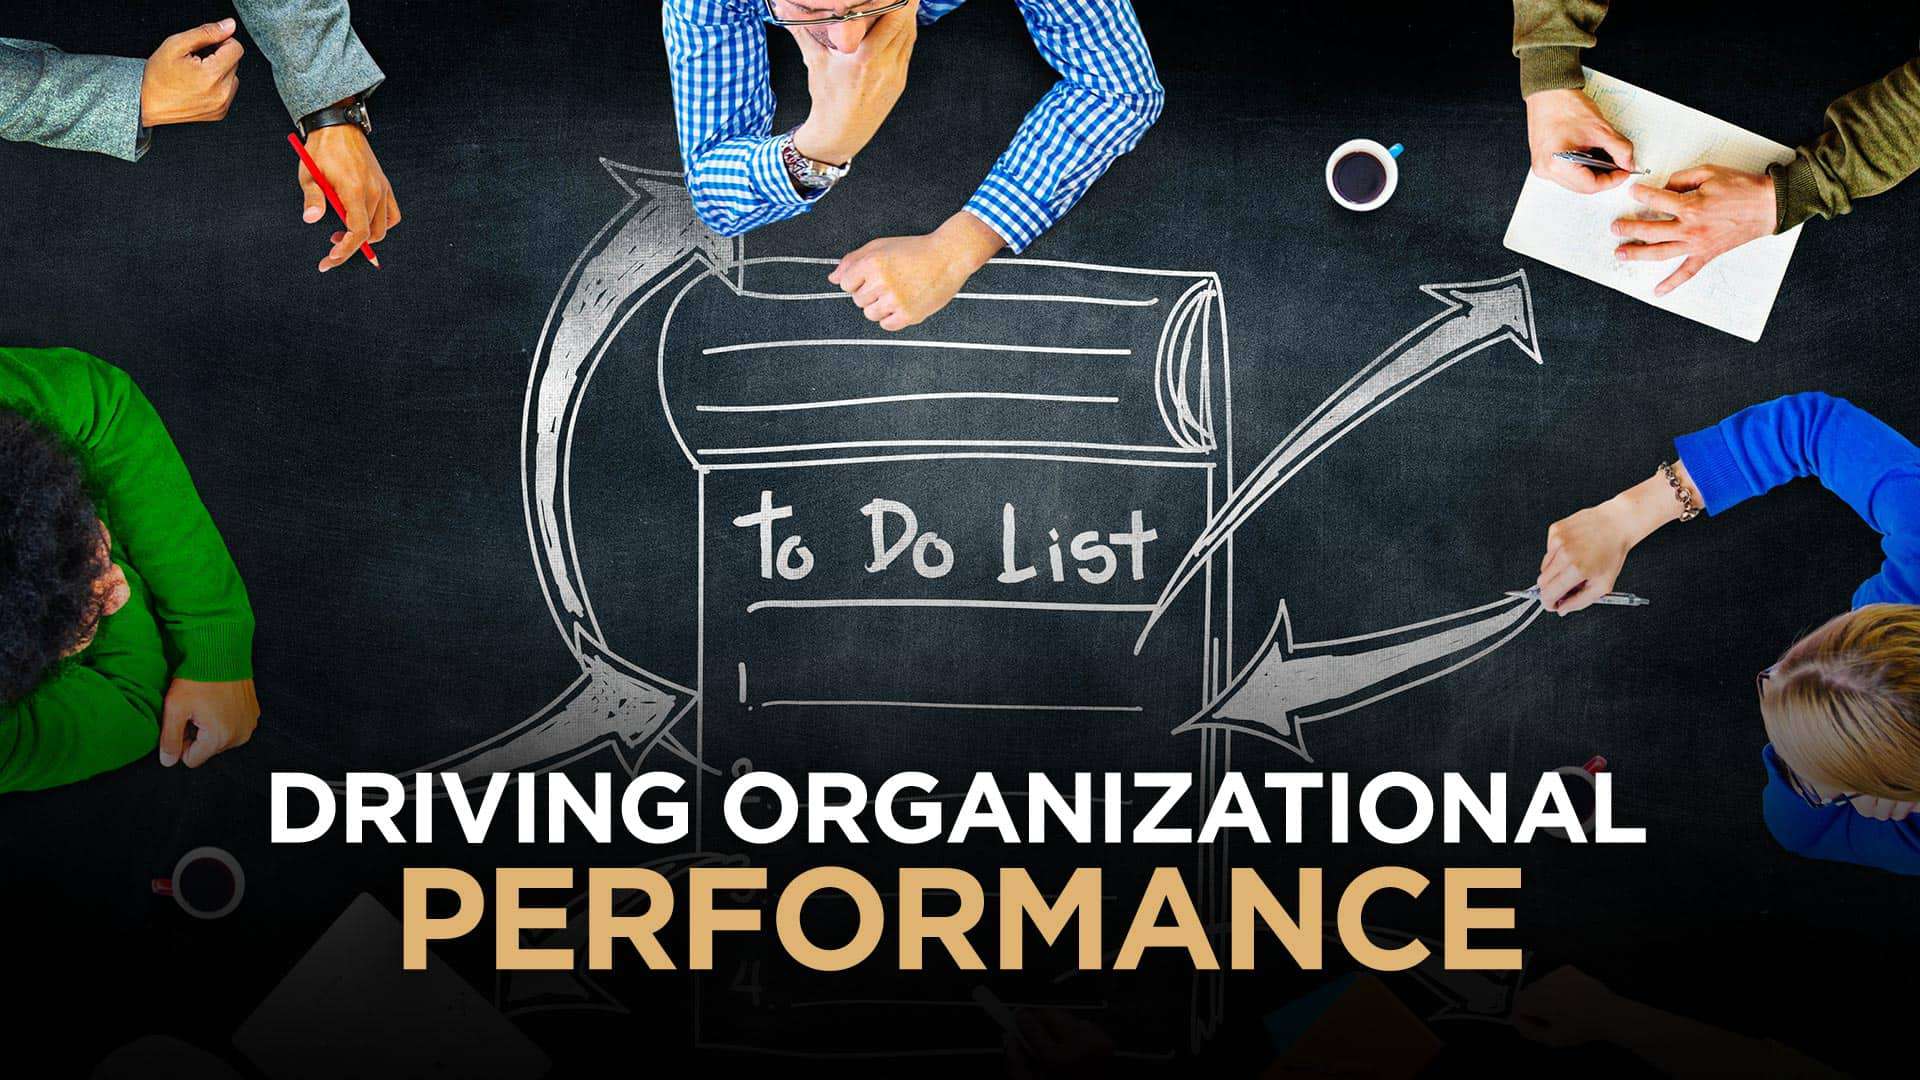 How Organizational Performance Can Drive Employees To Make Smarter Decisions